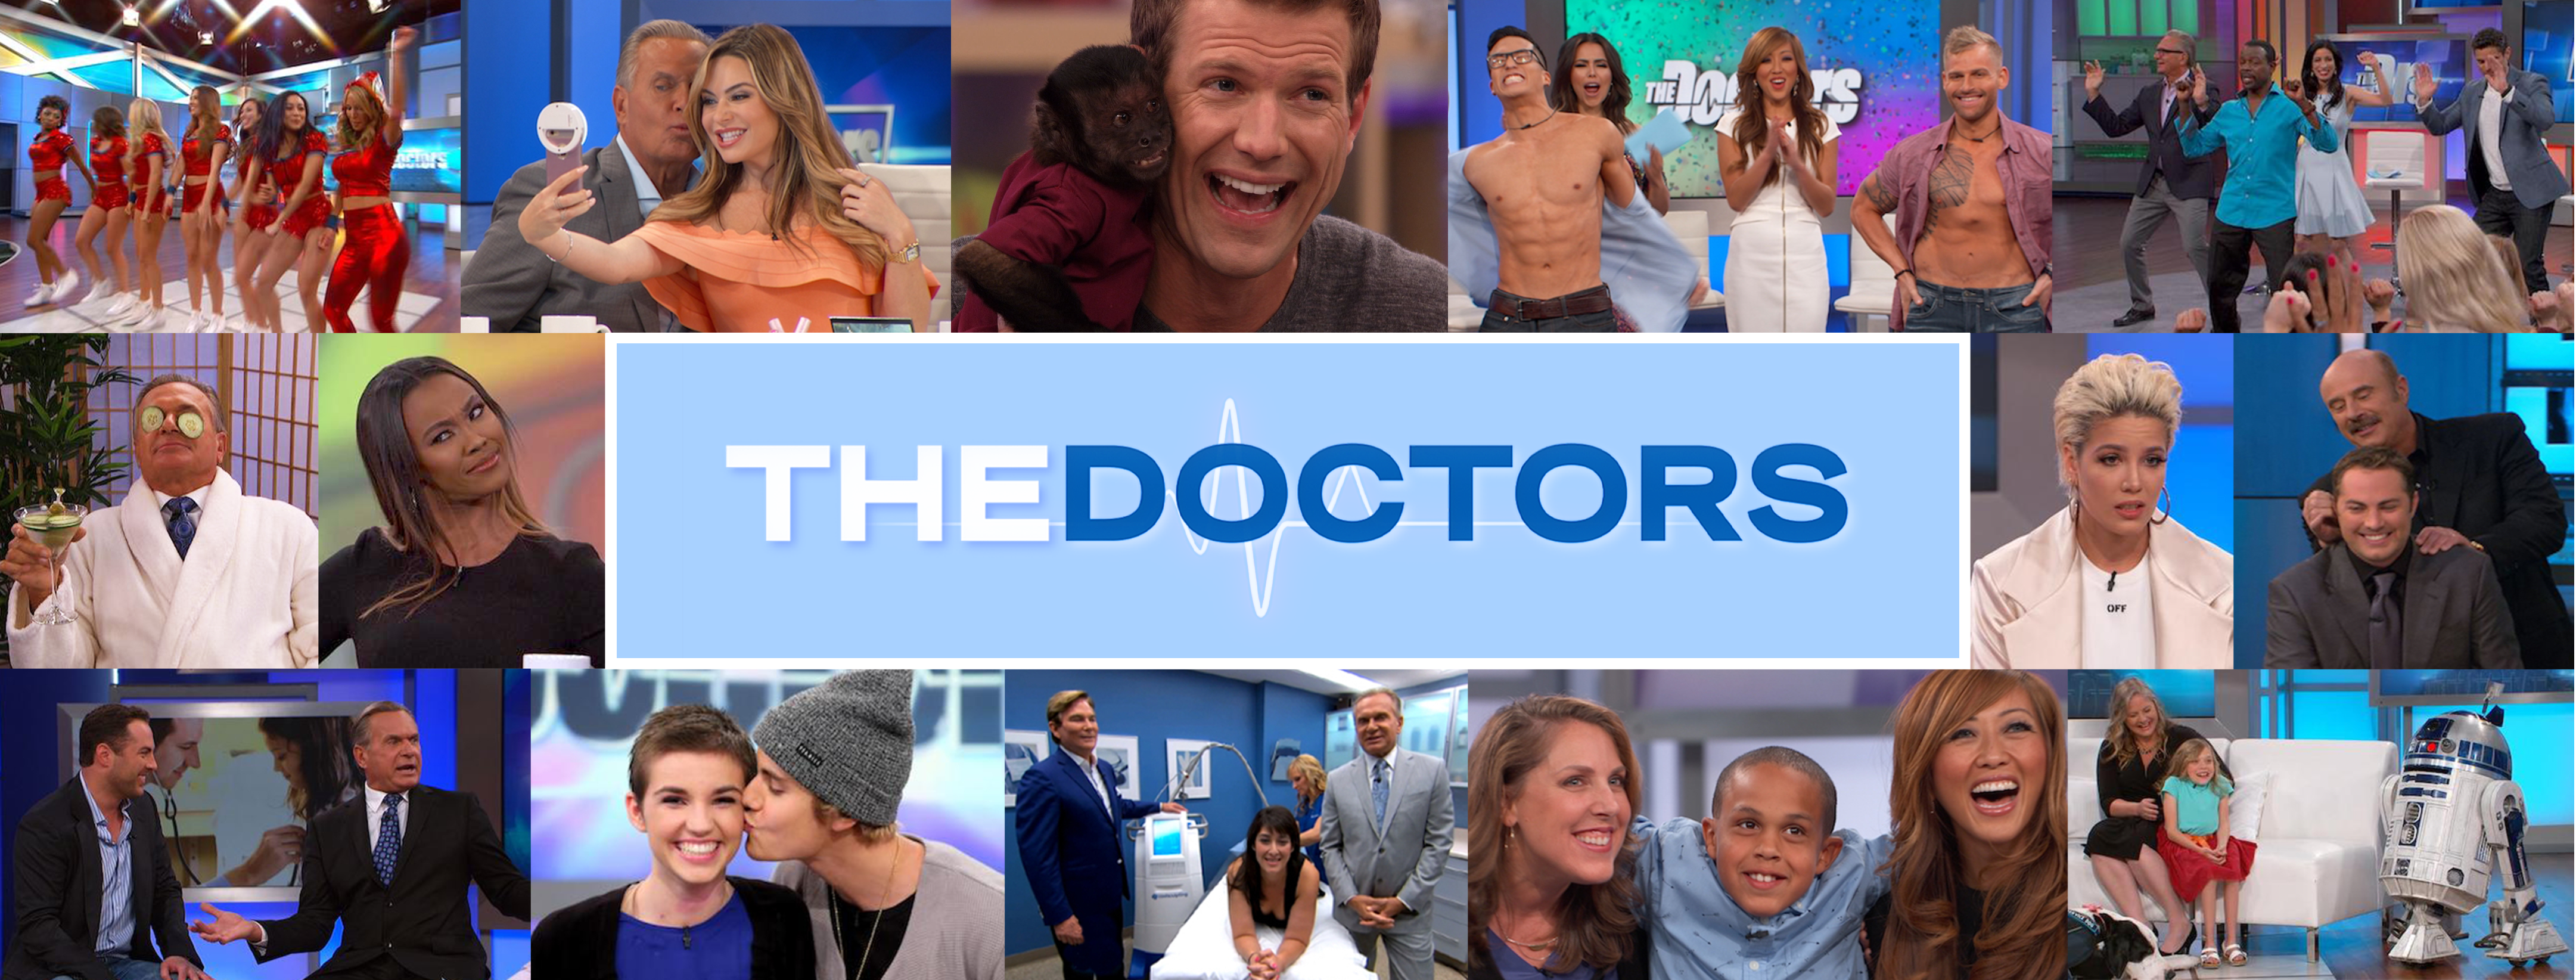 Can Removing Your Tonsils Leads to More Illnesses? | The Doctors TV Show